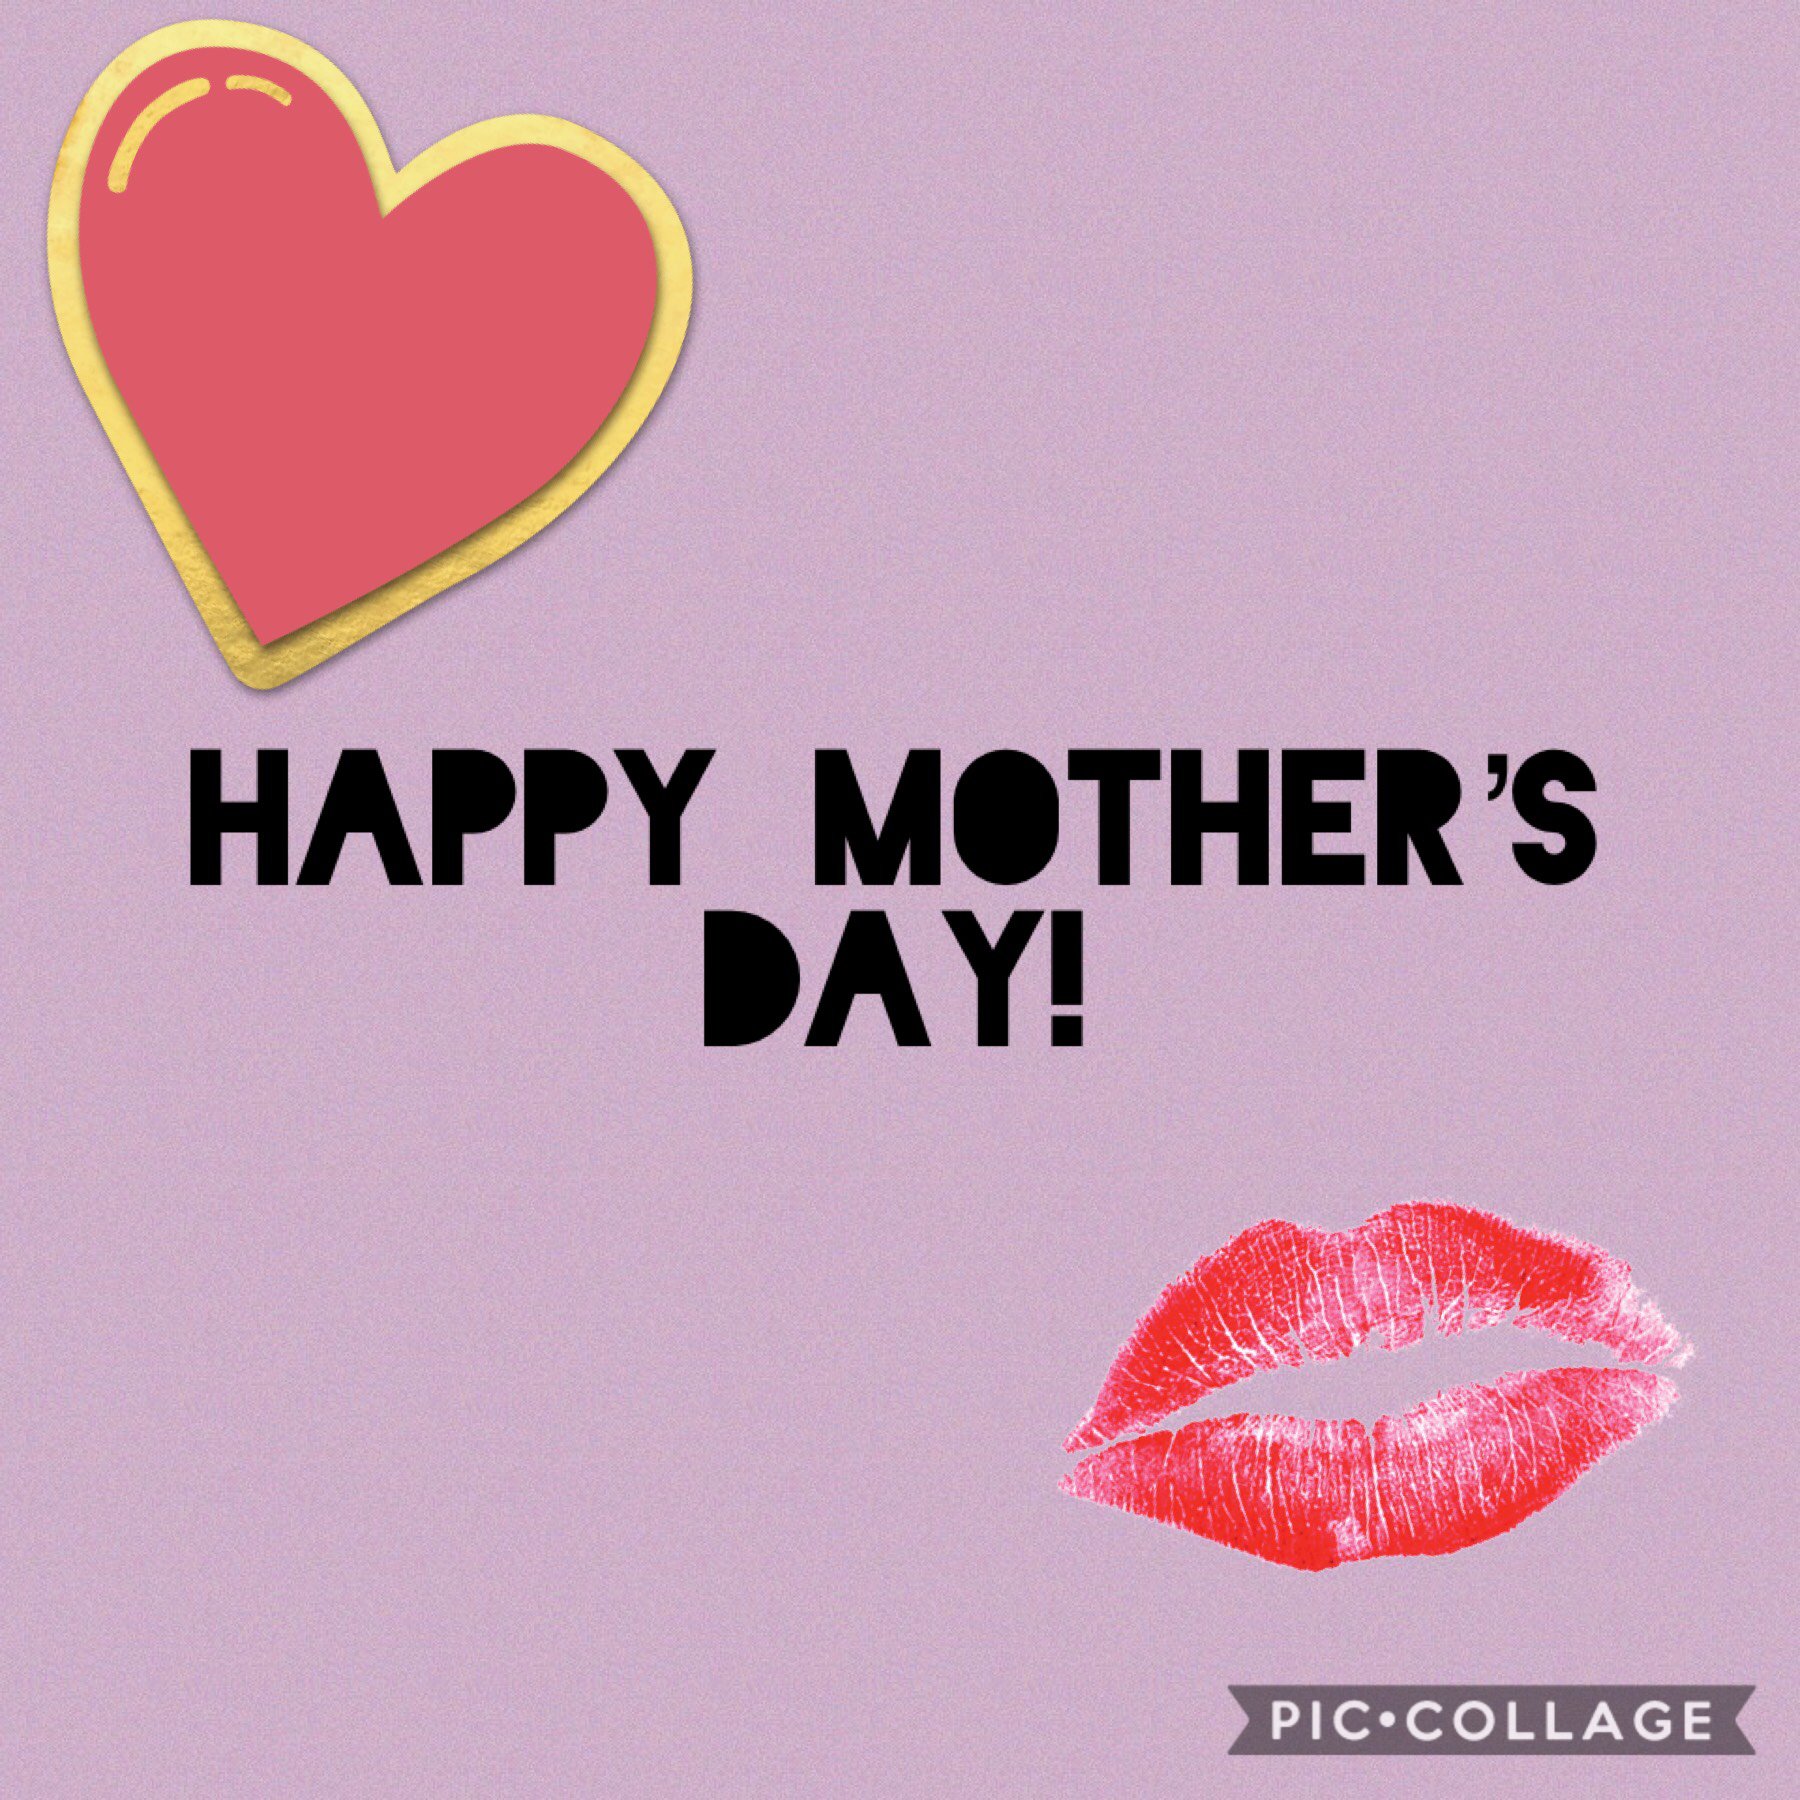 Happy
Mother’s 
Day